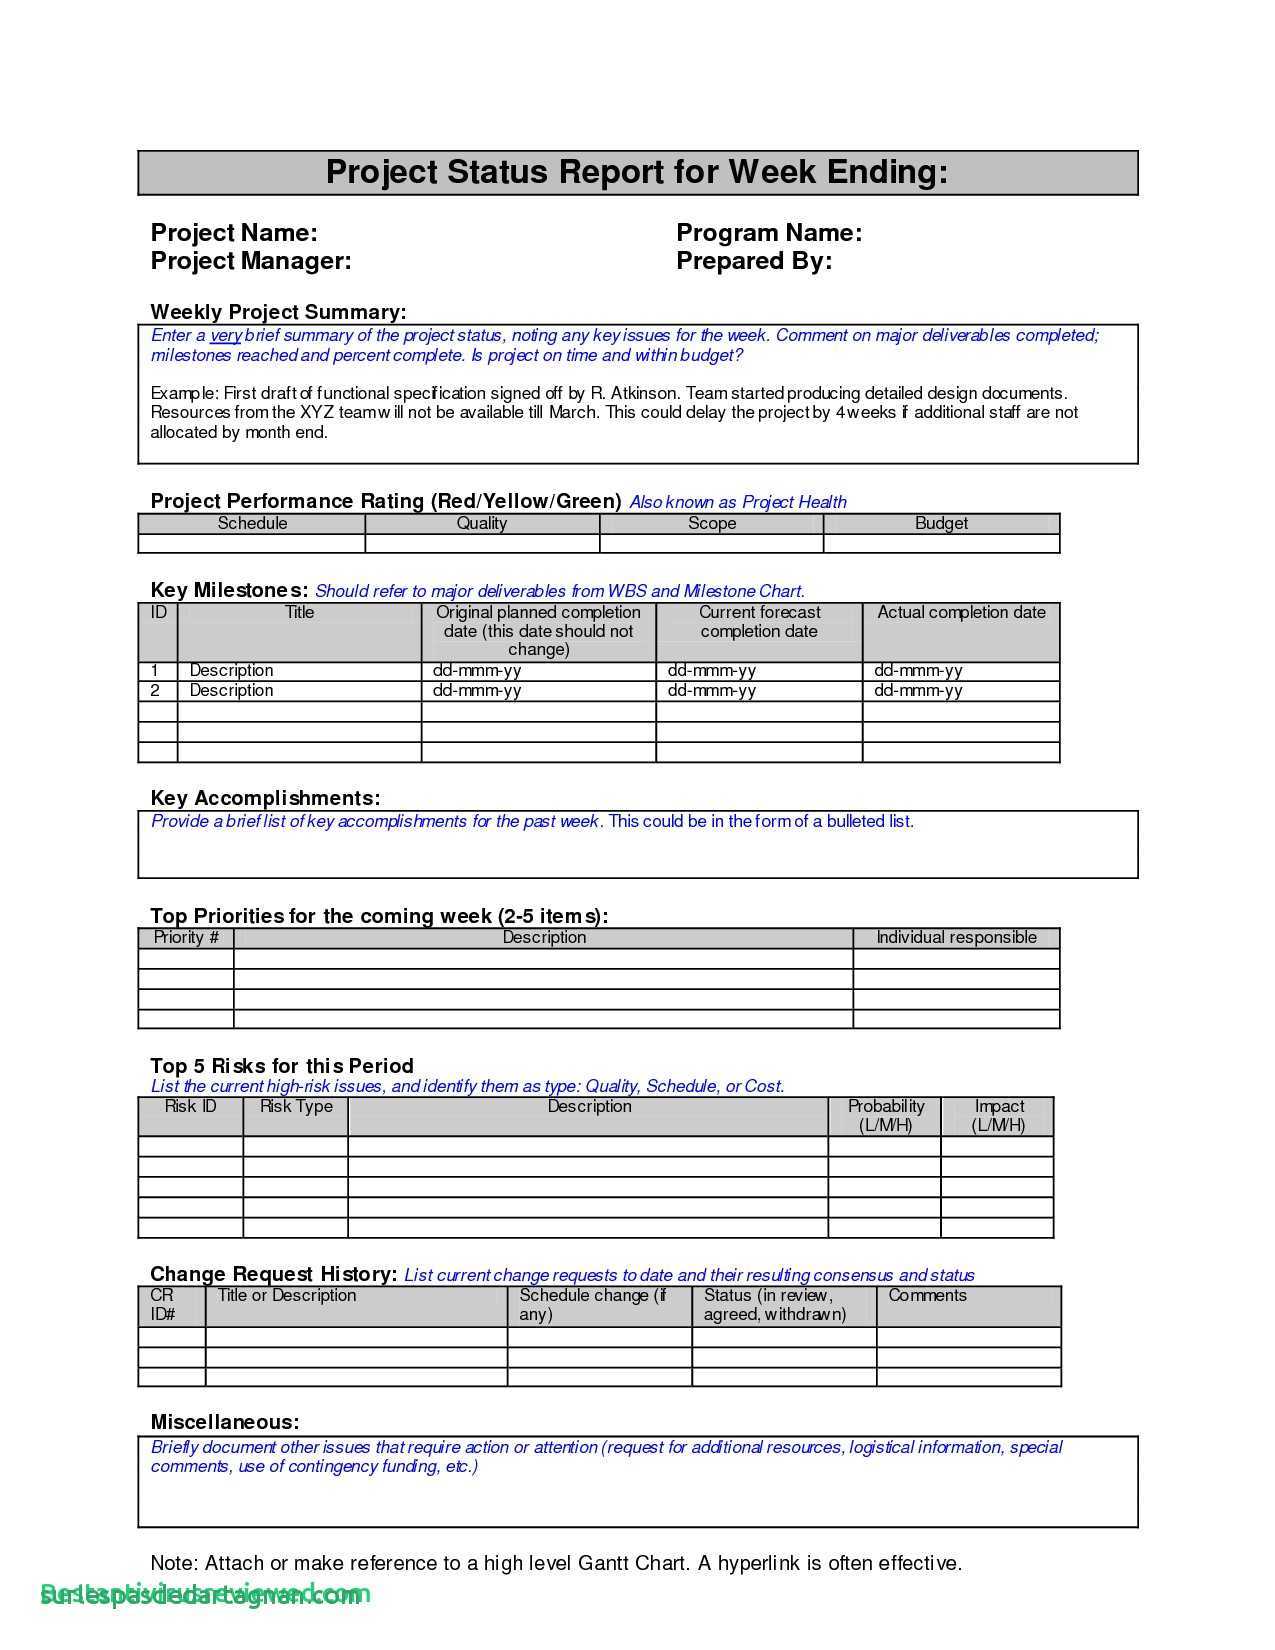 12 Conflict Minerals Reporting Template Example | Radaircars In Conflict Minerals Reporting Template